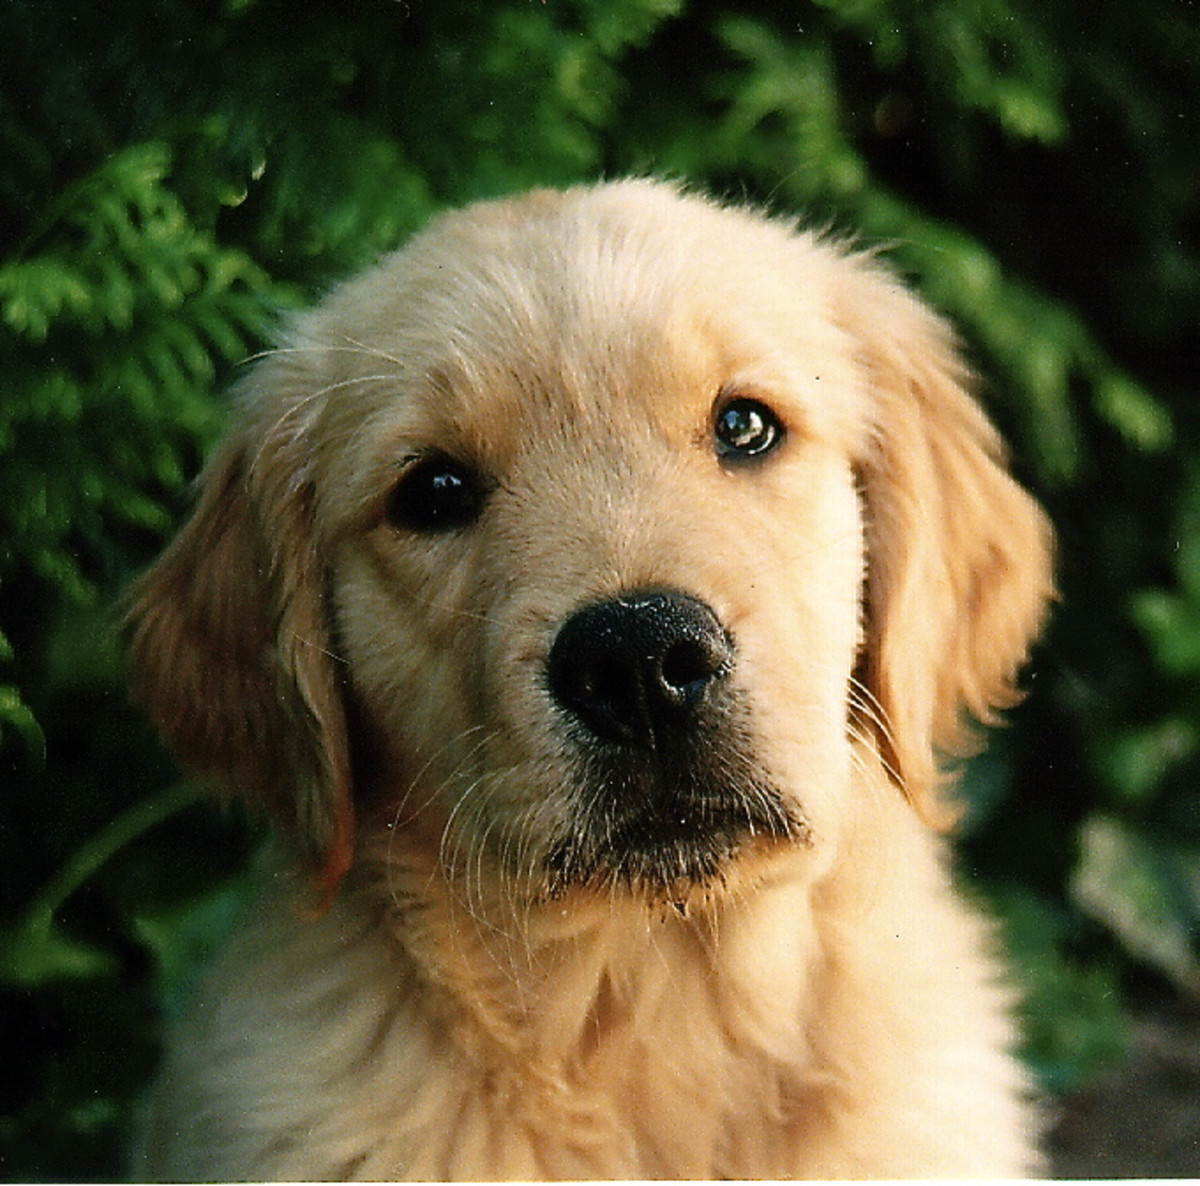 This is Sam, my golden retriever. A puppy has the potential for a long and happy life and is another symbol of hope for me.